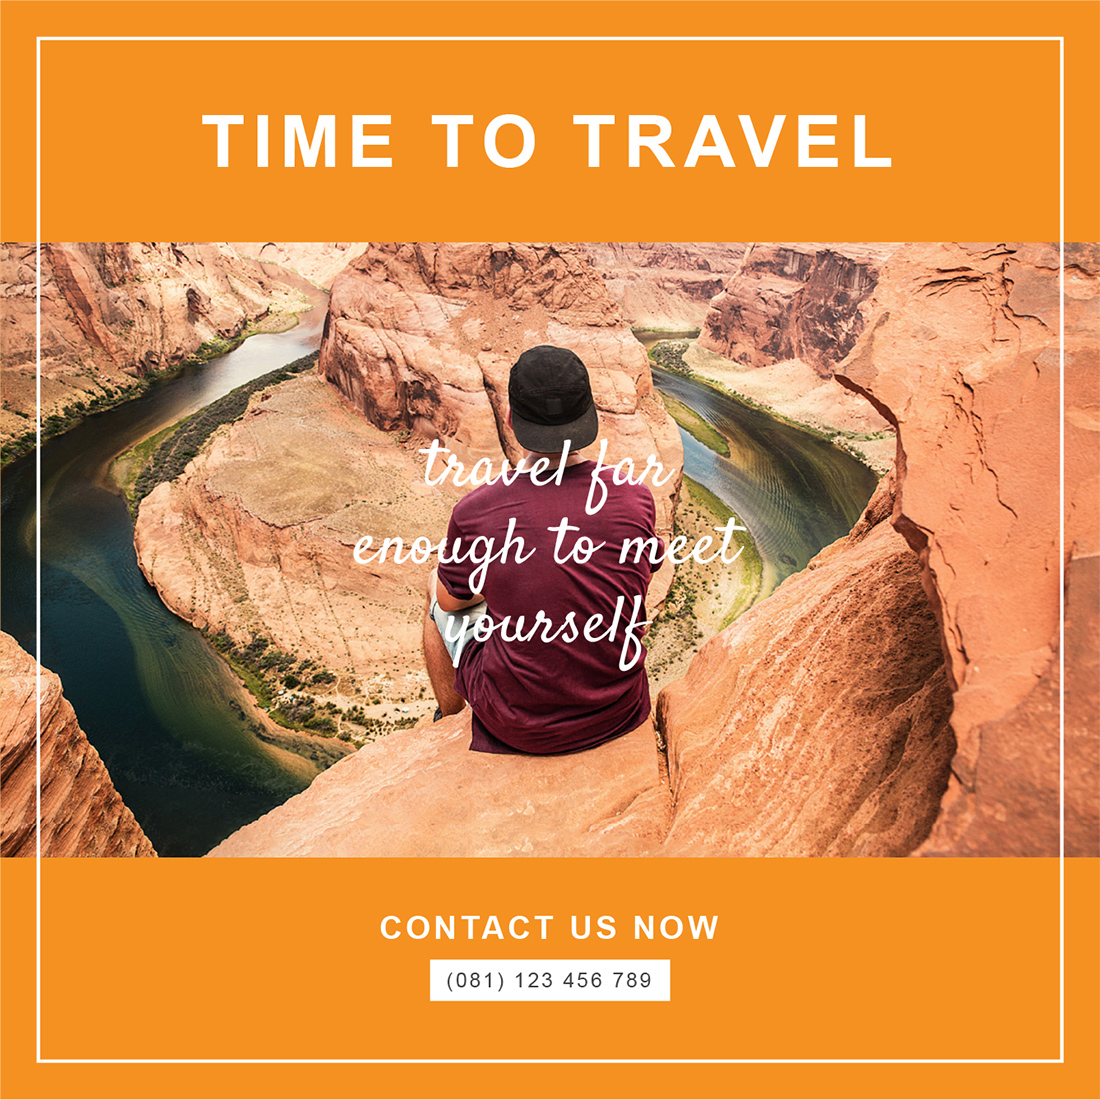 Travelling Theme Social Media Post Templates time to tavel.